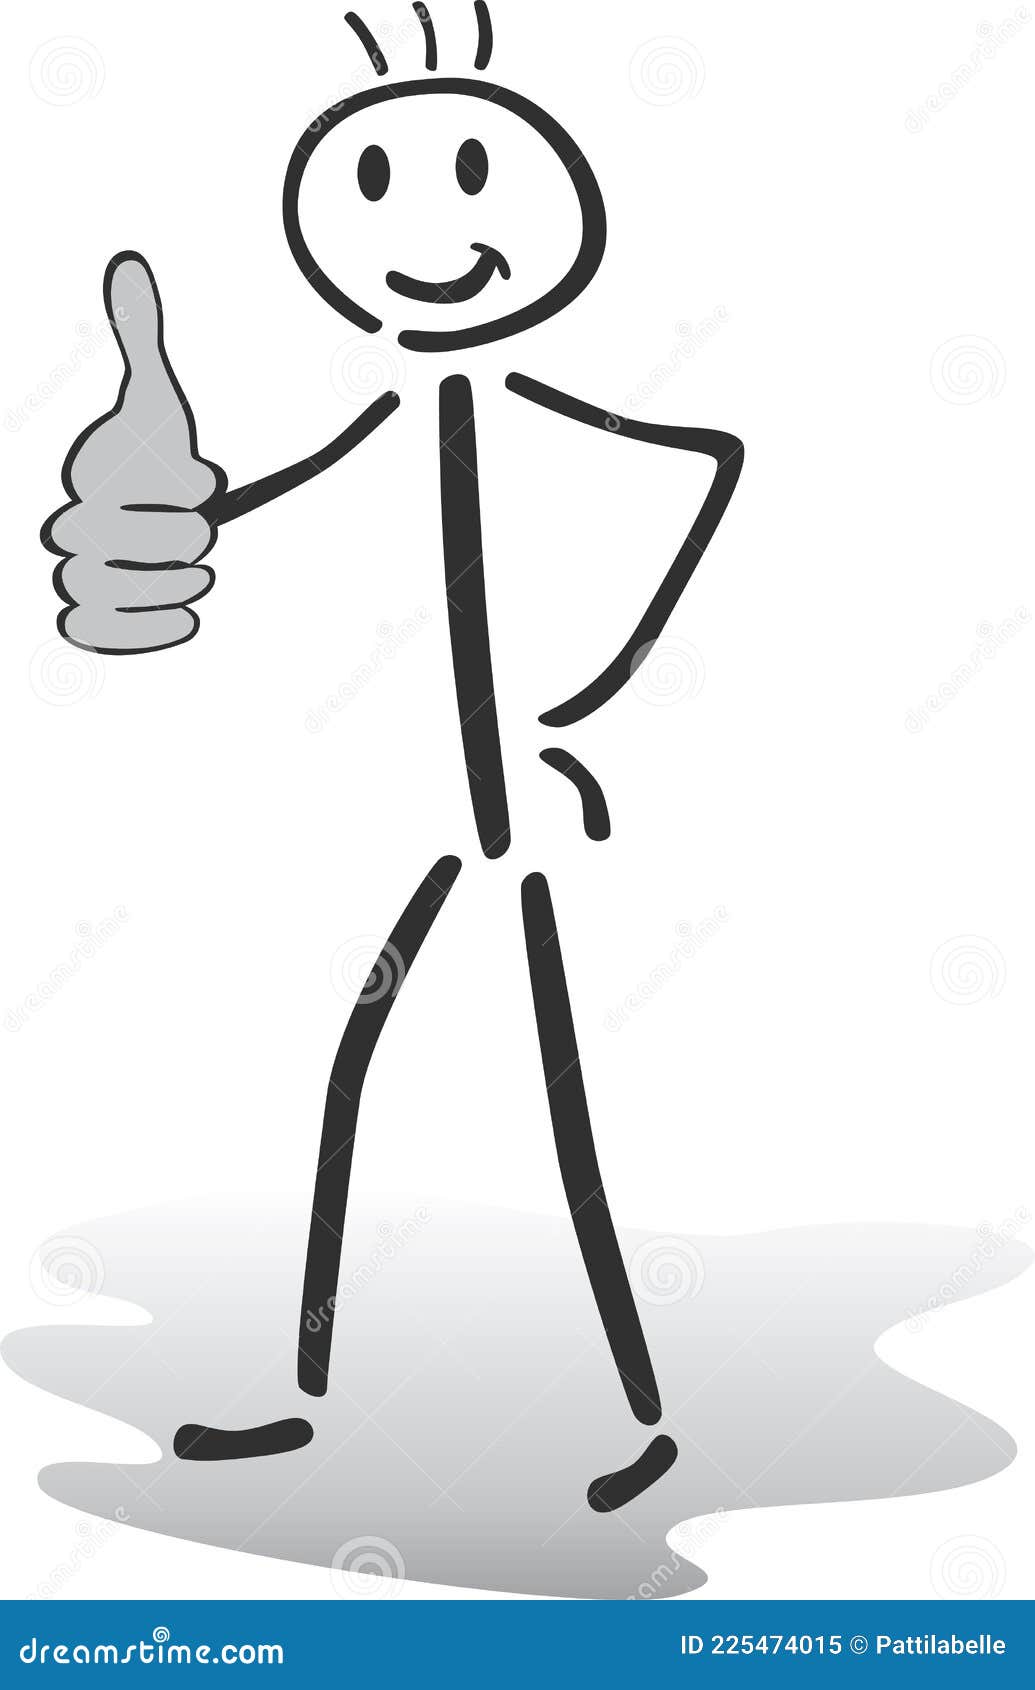 https://thumbs.dreamstime.com/z/abstract-simplified-stick-man-showing-thumbs-up-ok-gesture-illustration-stick-man-thumbs-up-ok-225474015.jpg